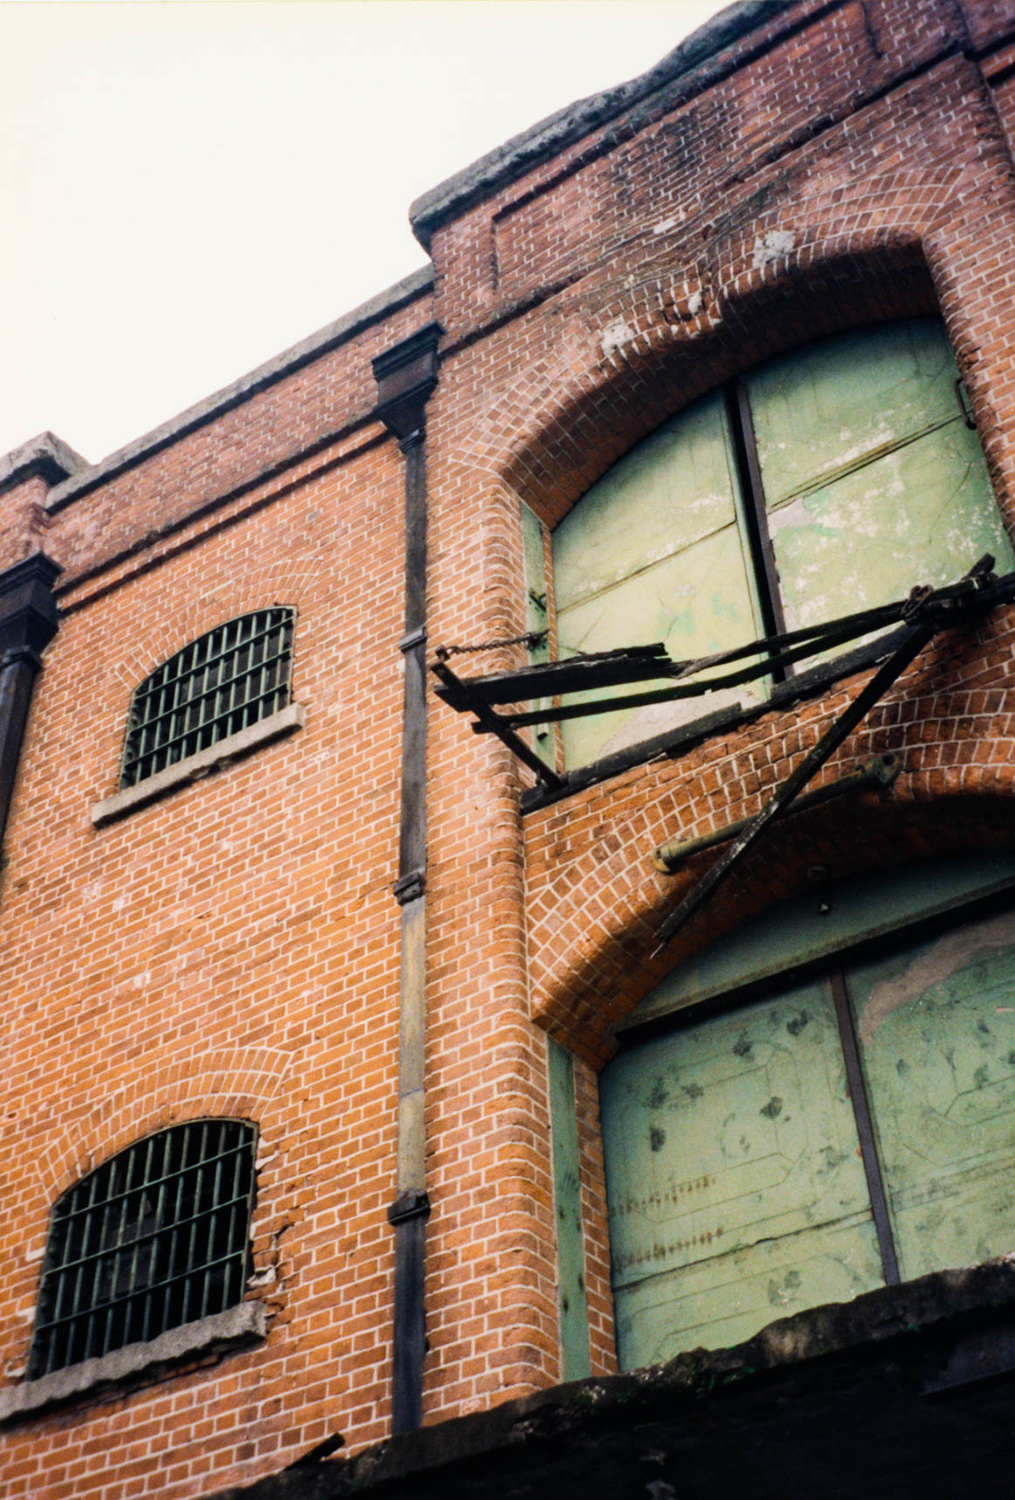 <p>The gentrification of Buenos Aires' Puerto Madero district had not reached very far in the late 1990s. The now-prized warehouses were in various states of dereliction at the time, like this one.</p>